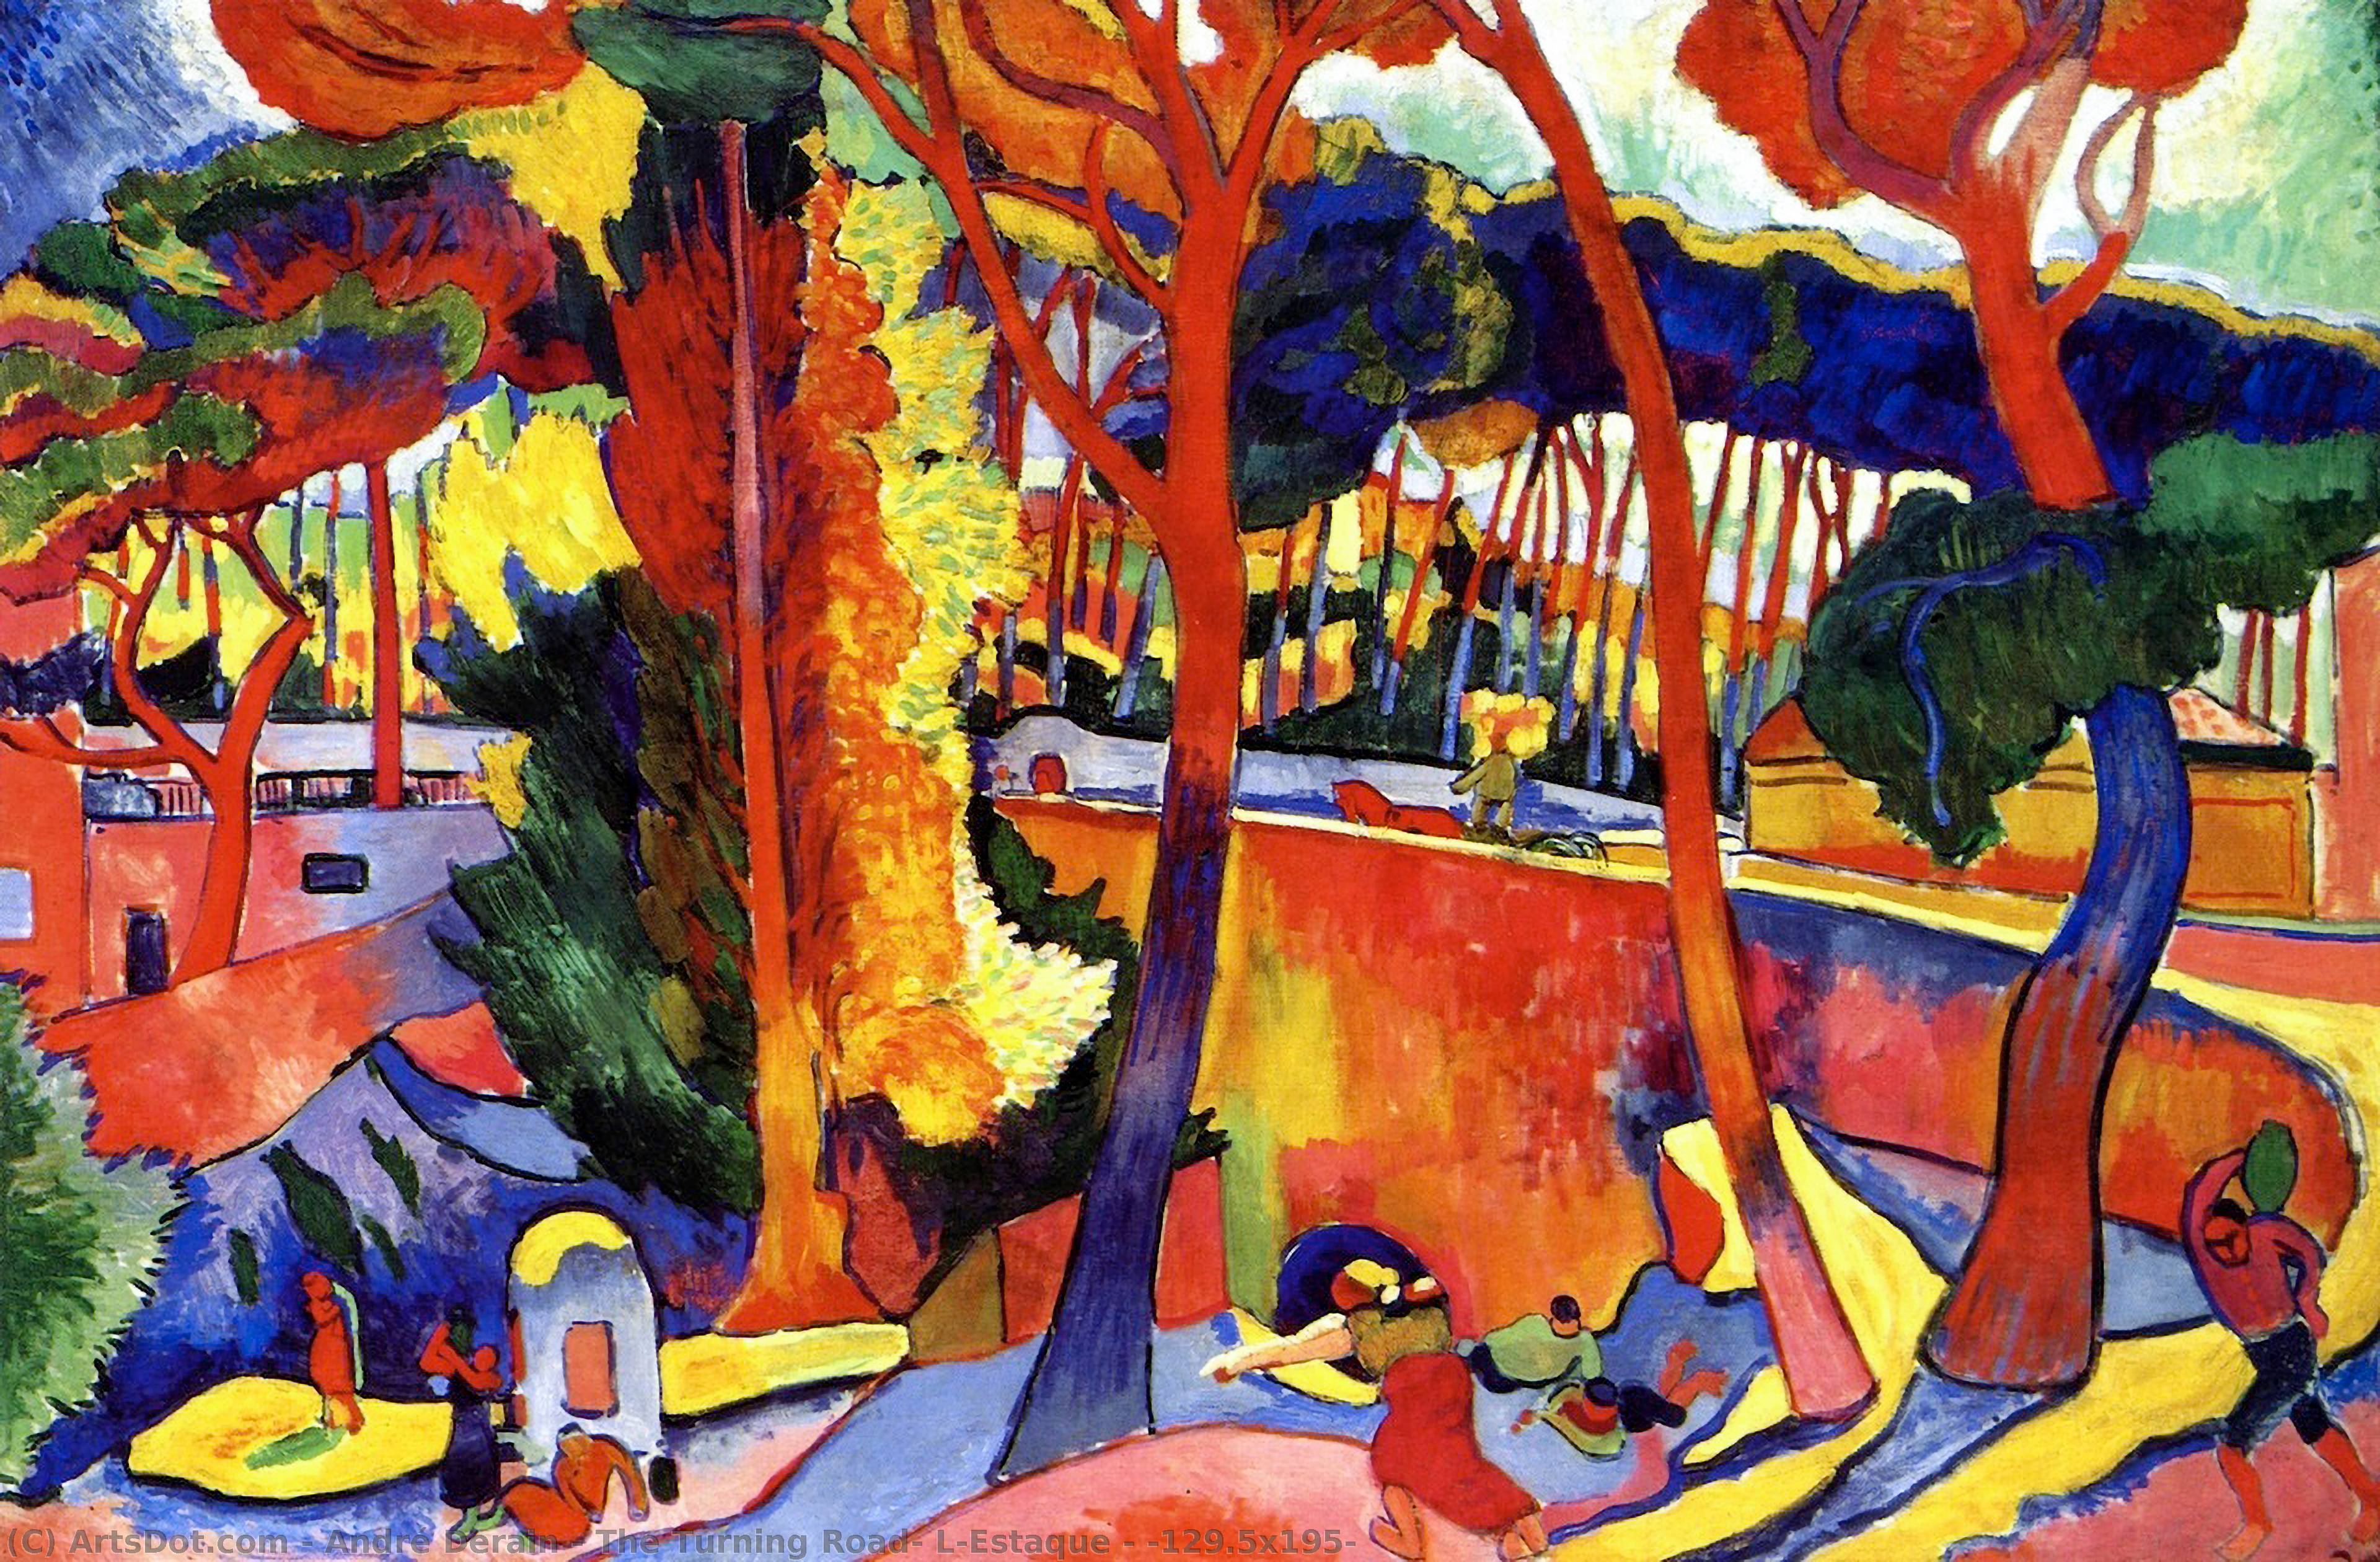 WikiOO.org - Encyclopedia of Fine Arts - Lukisan, Artwork André Derain - The Turning Road, L'Estaque - (129.5x195)